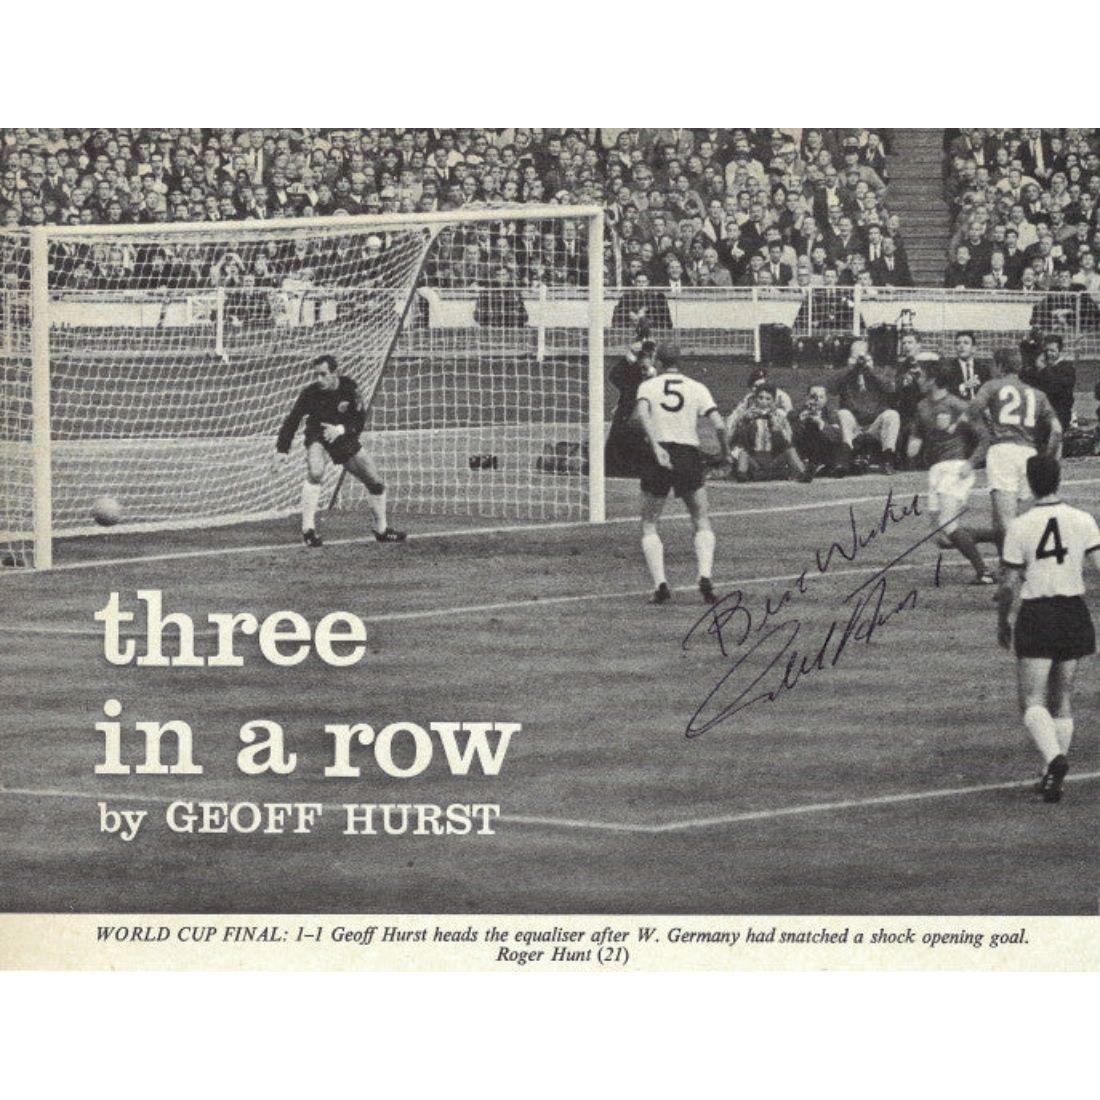 A collection of signed photographs from England’s 1966 World Cup winning squad

Accompanied by two official programmes for the tournament
England beat West Germany 4-2 in the final of the World Cup on July 30, 1966. To date it is England's only